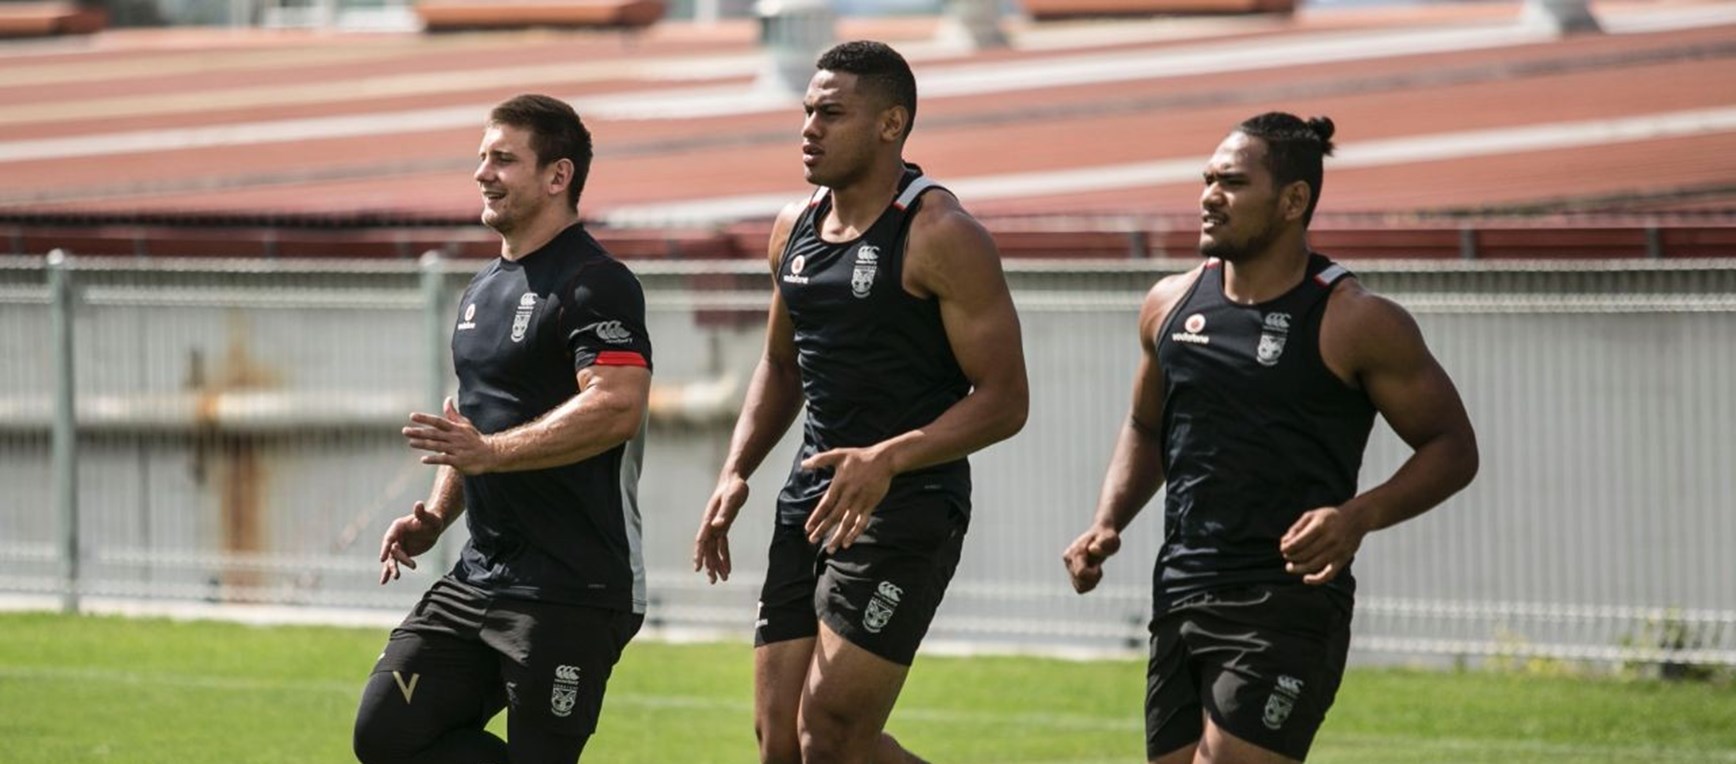 #NRLAKL9s training in pictures